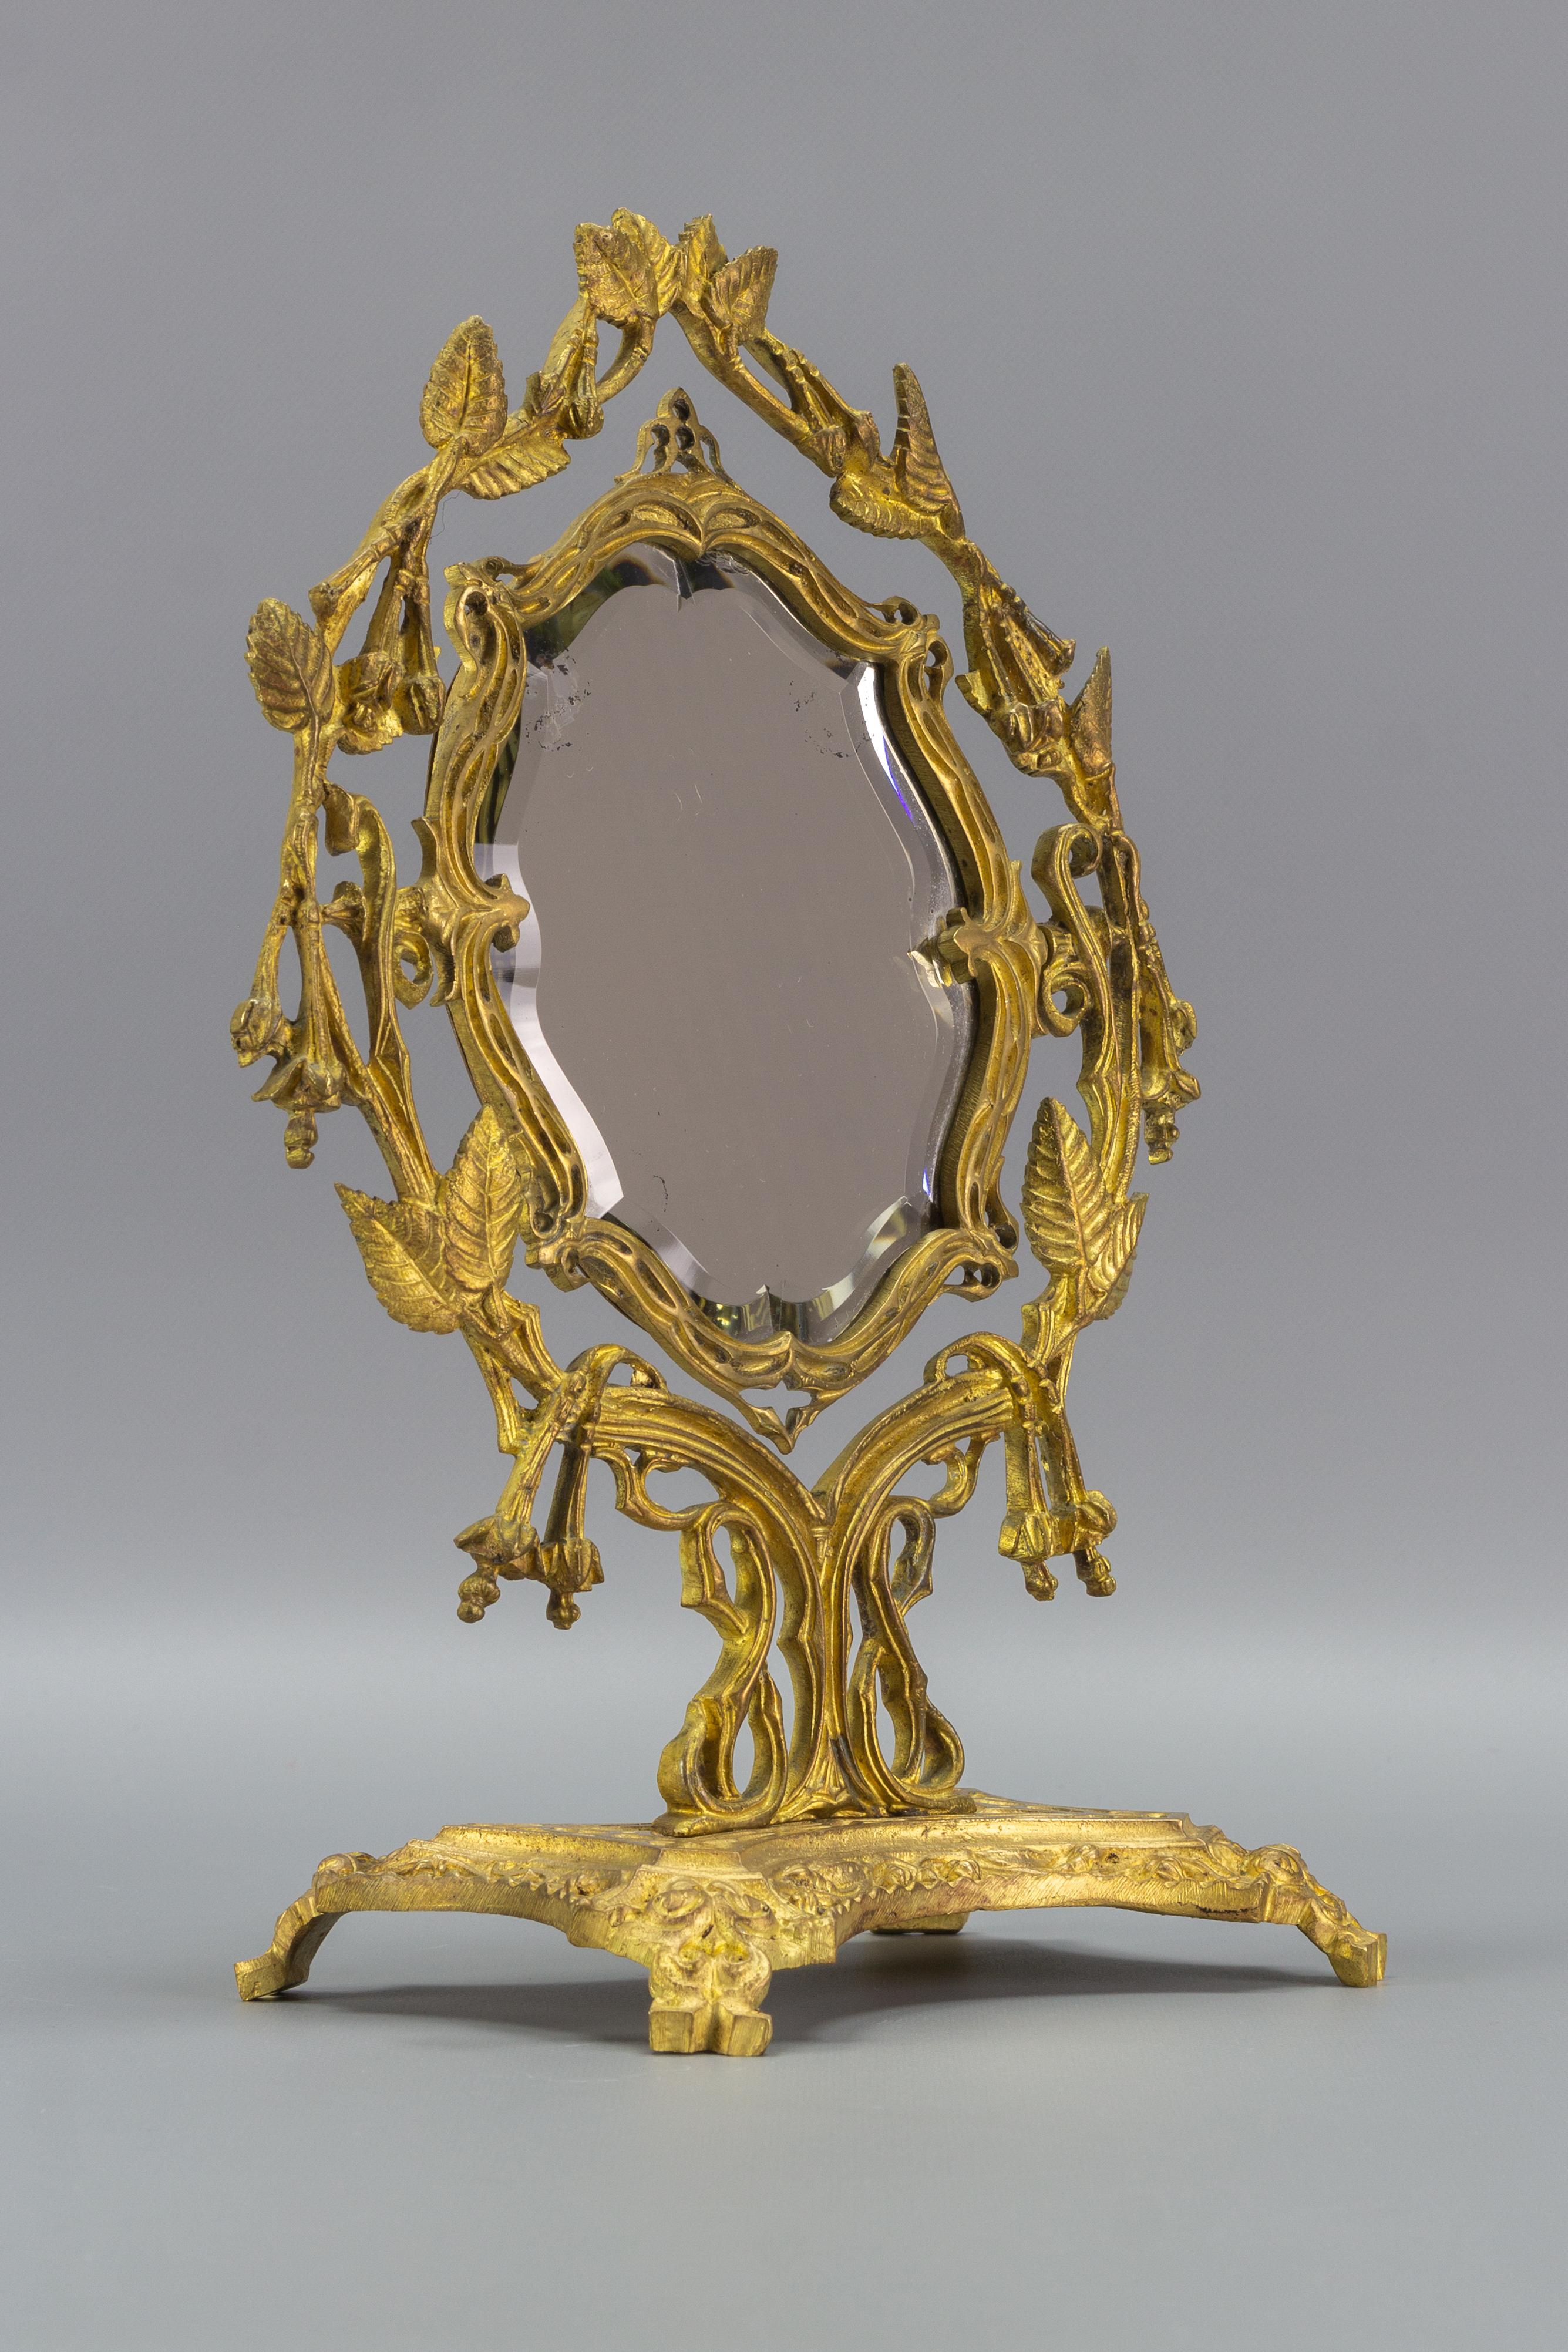 Gorgeous French dressing tabletop mirror, made of bronze and adorned with floral and leaf motifs. Beautifully shaped mirror. France, 1930s.
Dimensions: height: 36 cm / 14.17 in; width: 19 cm / 7.48 in; depth: 14 cm / 5.51 in.